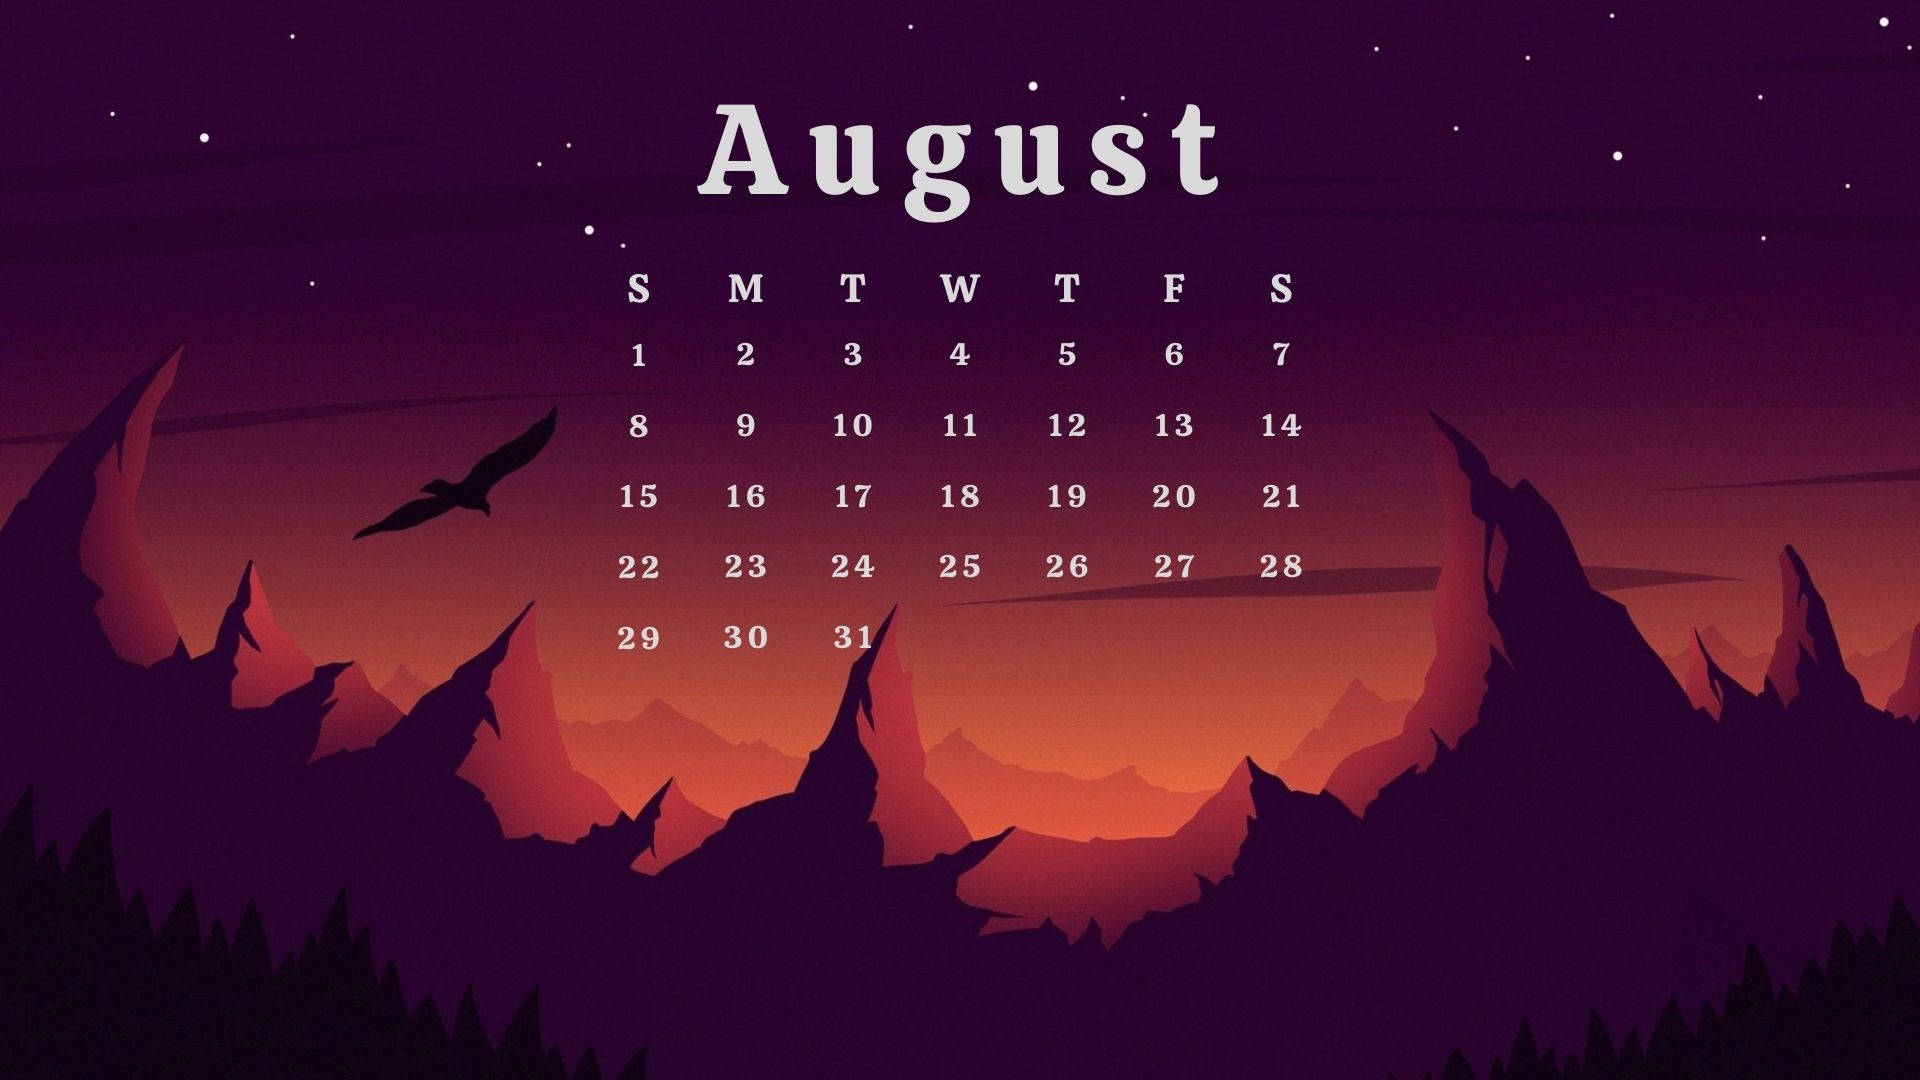 Celebration the beauty of August with a Starry Night Wallpaper